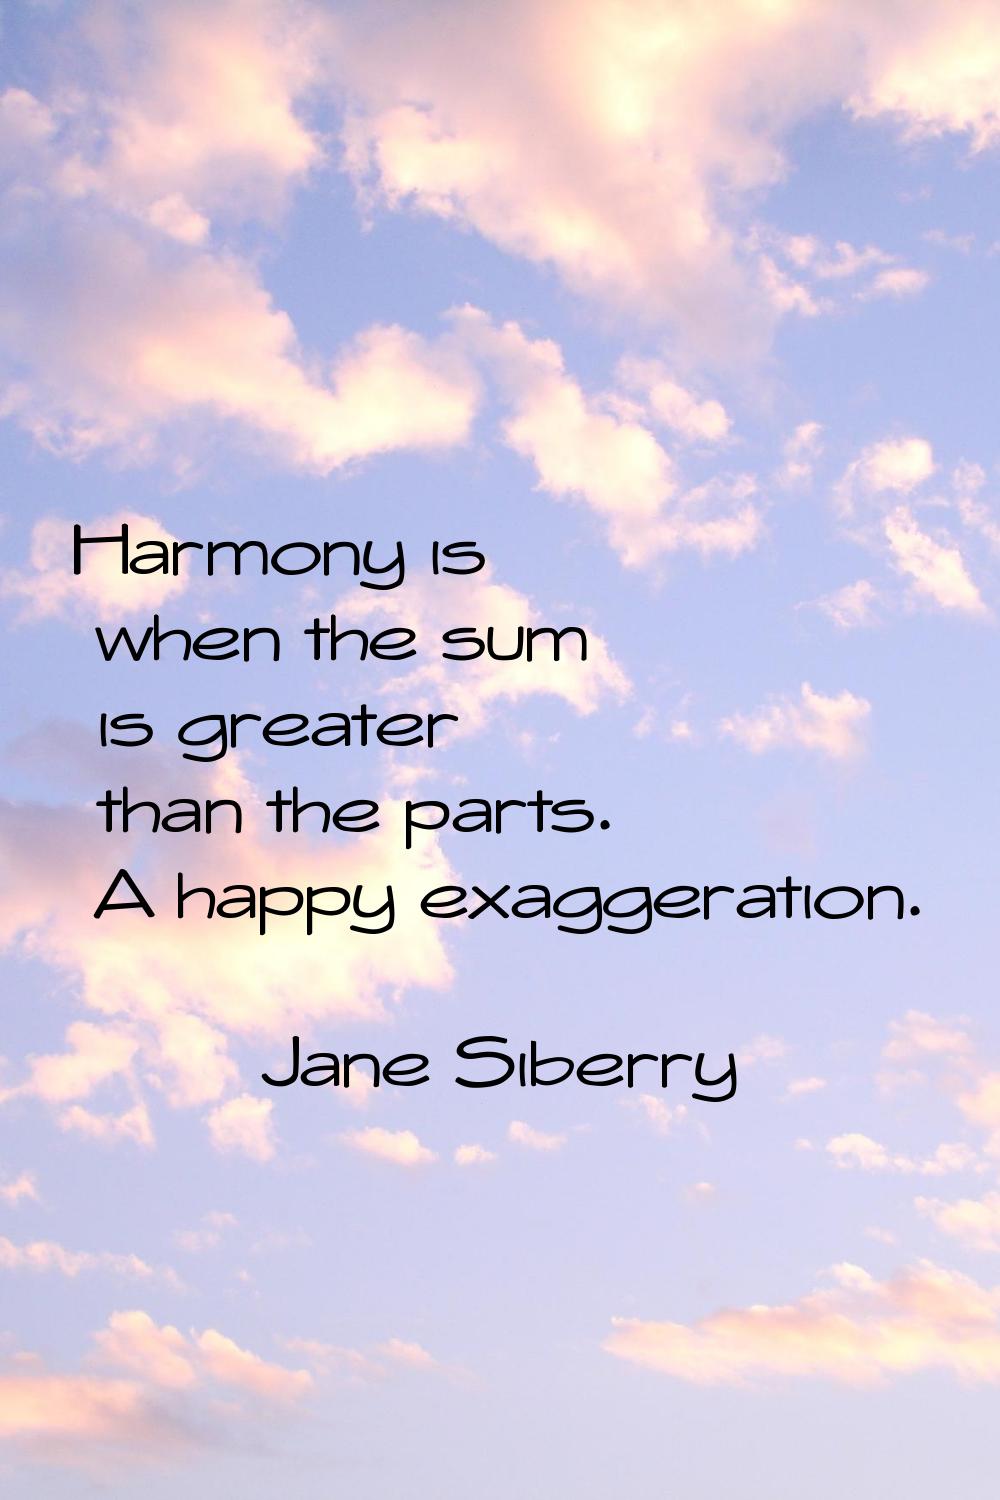 Harmony is when the sum is greater than the parts. A happy exaggeration.